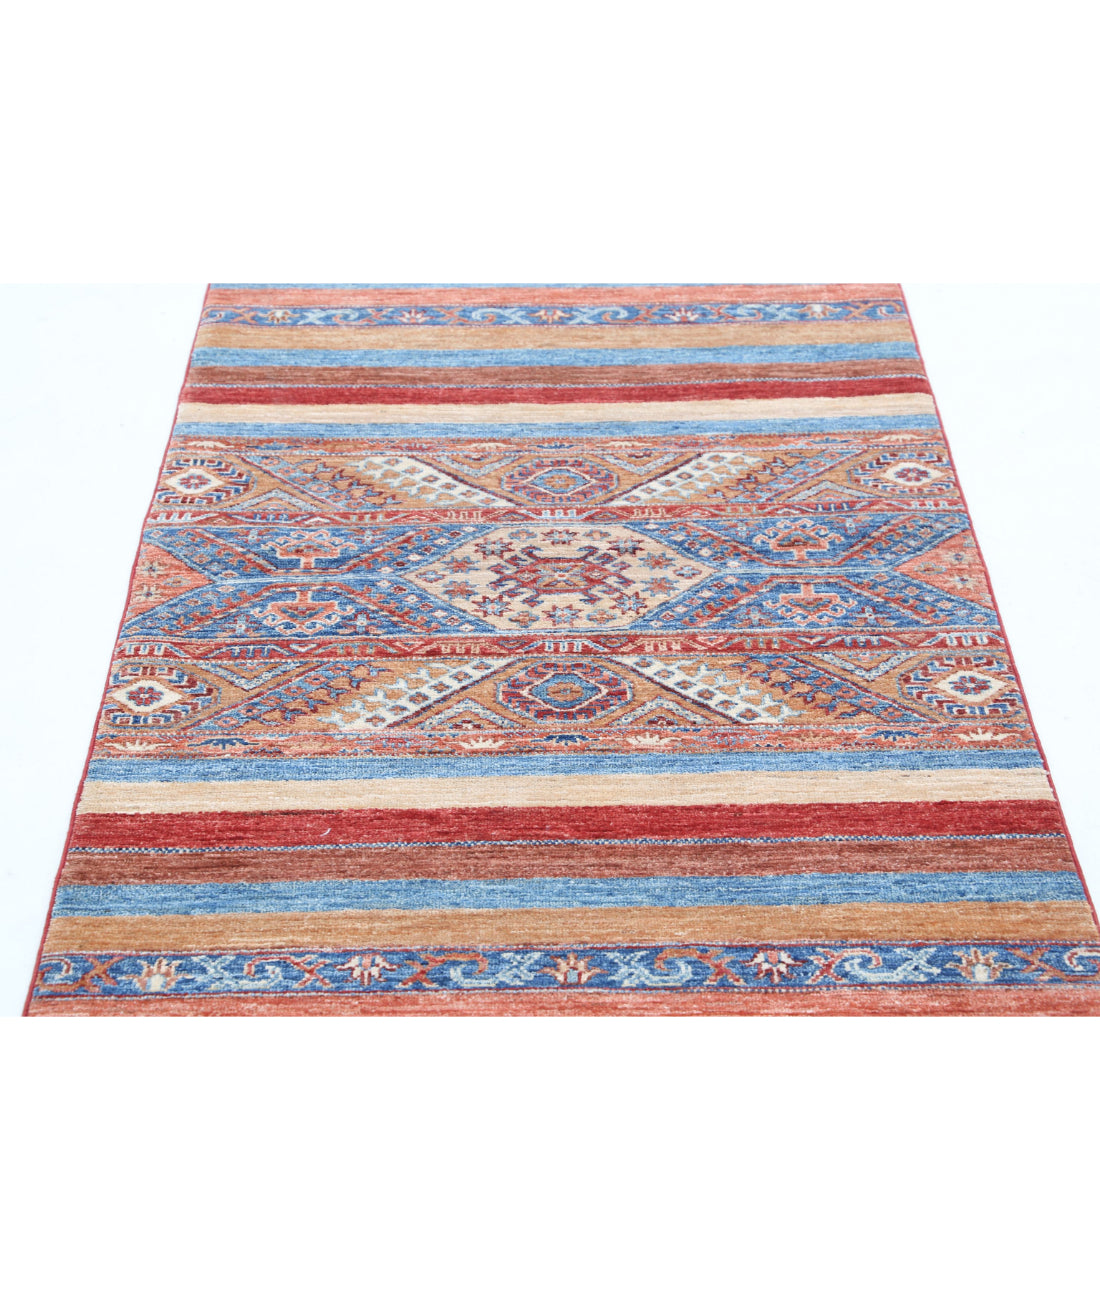 Hand Knotted Khurjeen Wool Rug - 2'11'' x 4'10'' 2'11'' x 4'10'' (88 X 145) / Multi / Multi